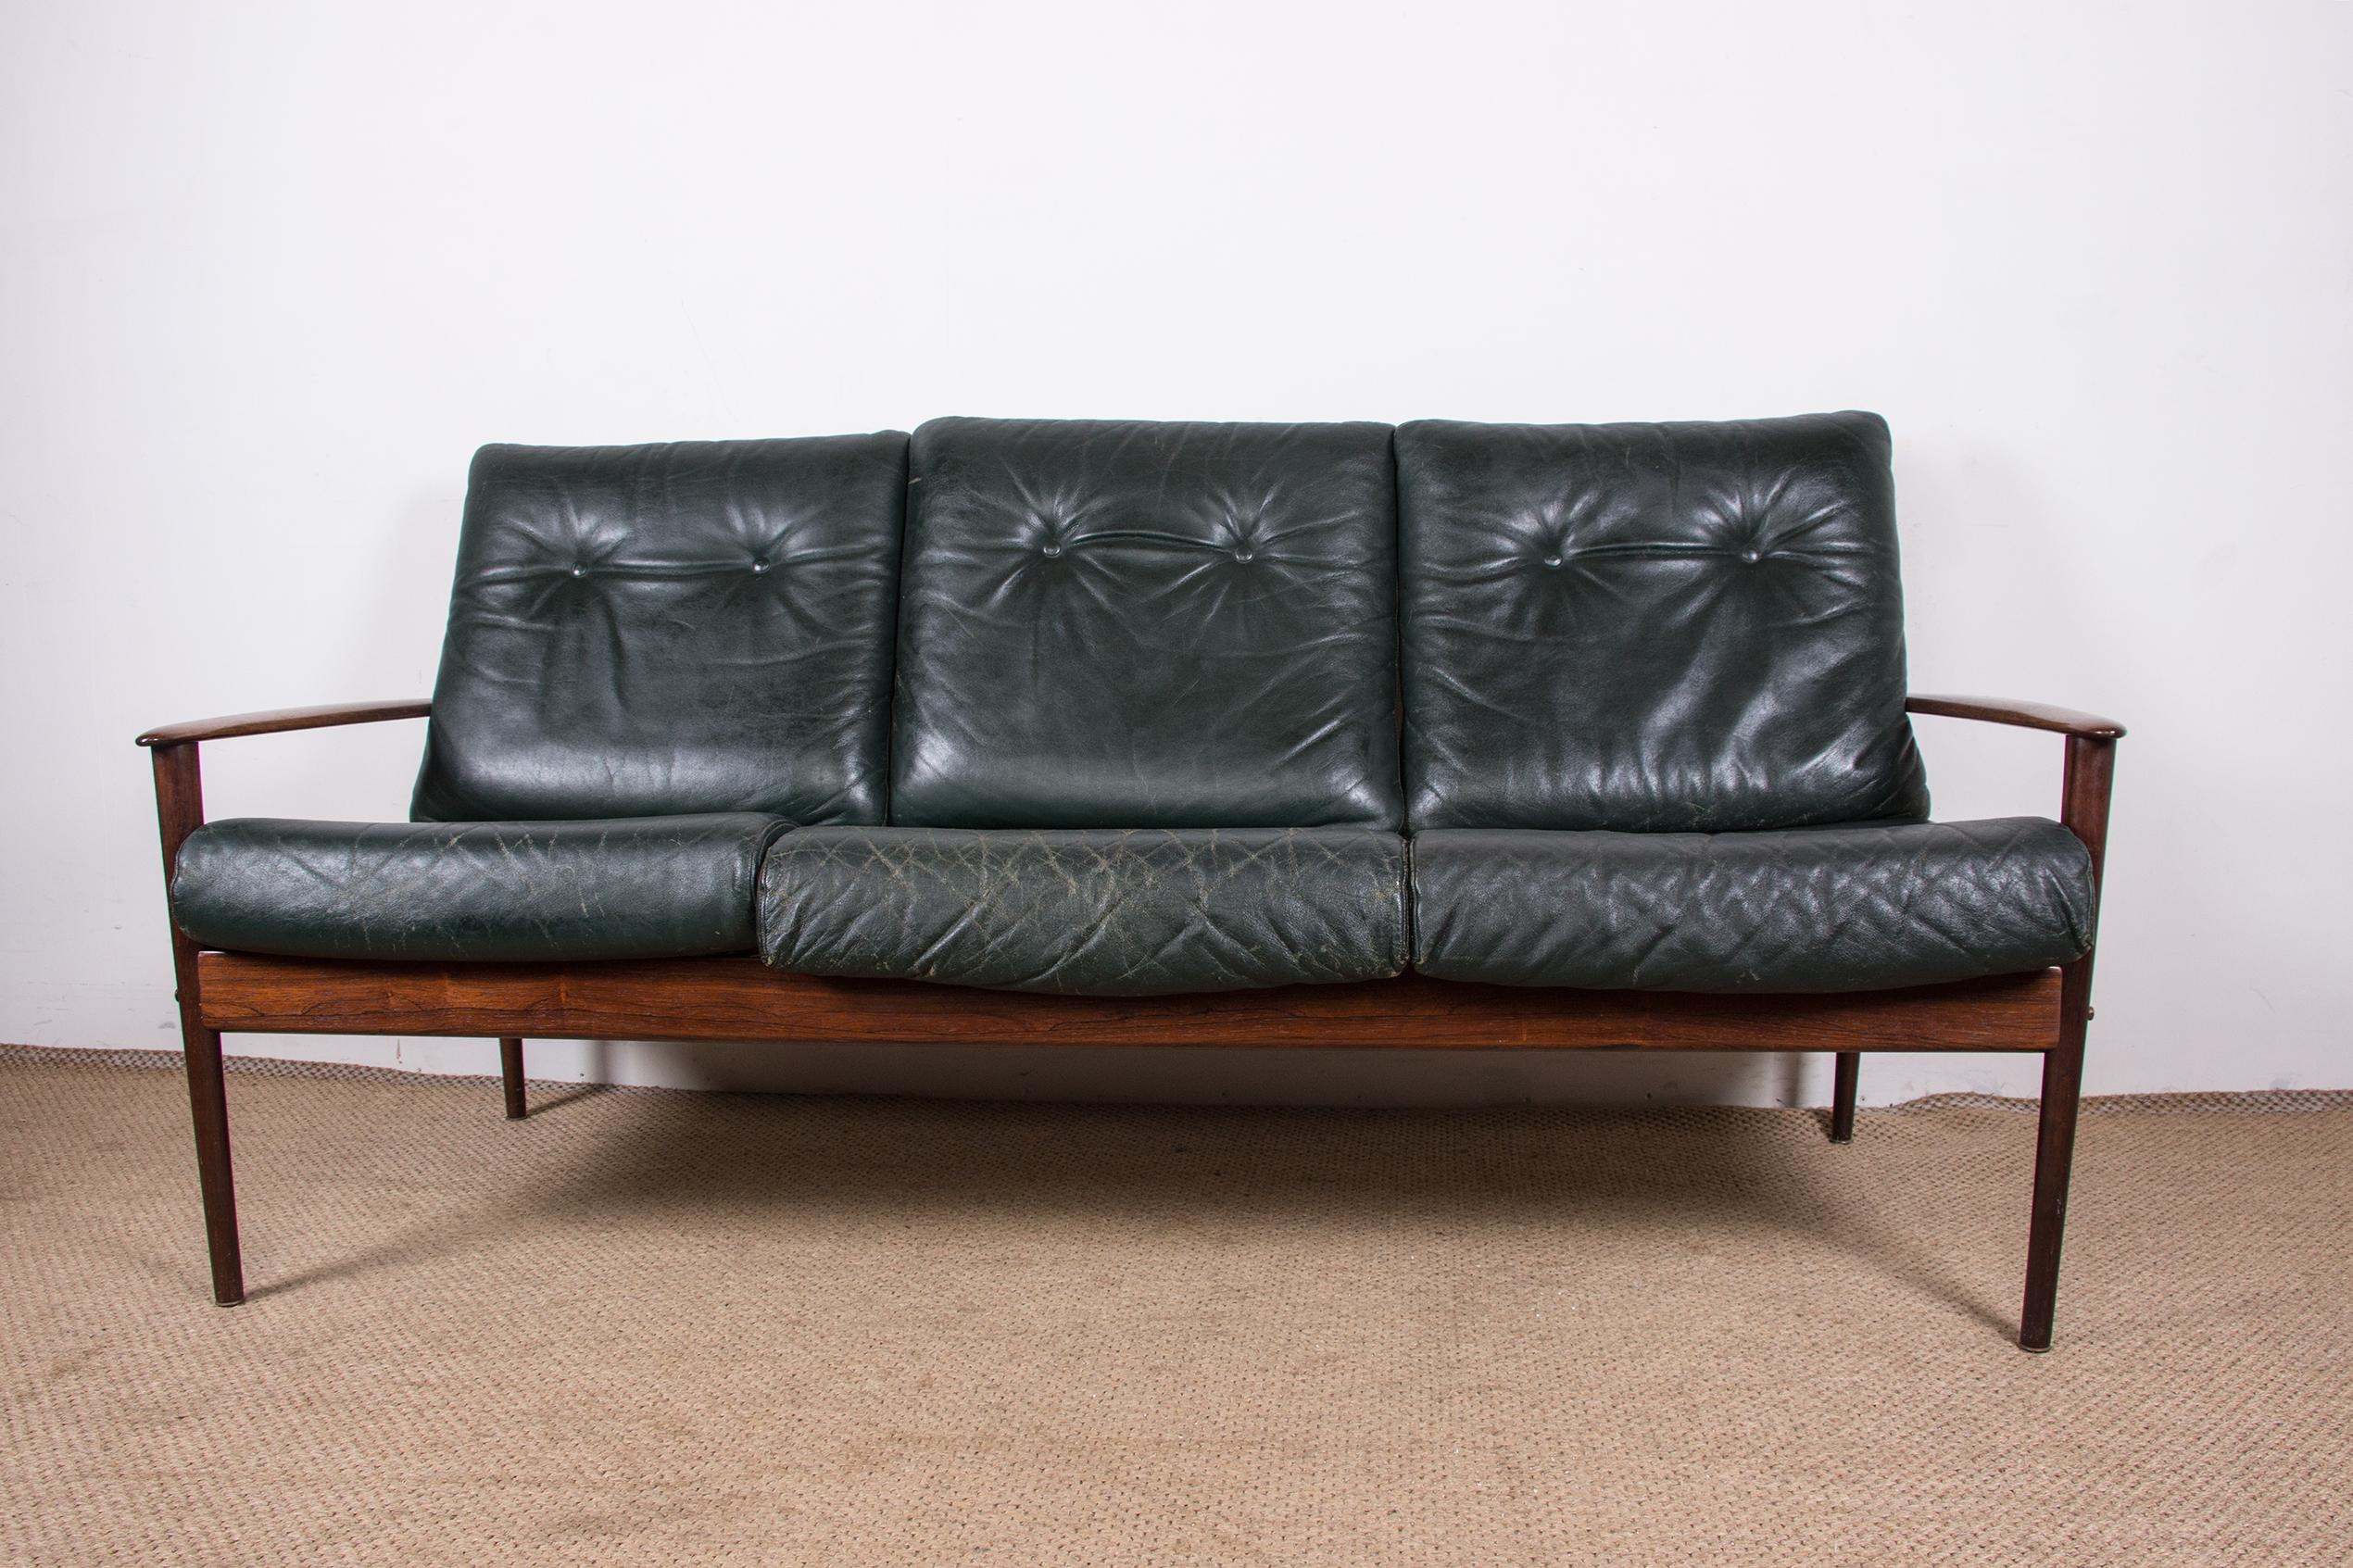 Scandinavian Modern Danish 3 seater sofa, Rosewood and Leather by Grete Jalk for Poul Jepessen 1960.